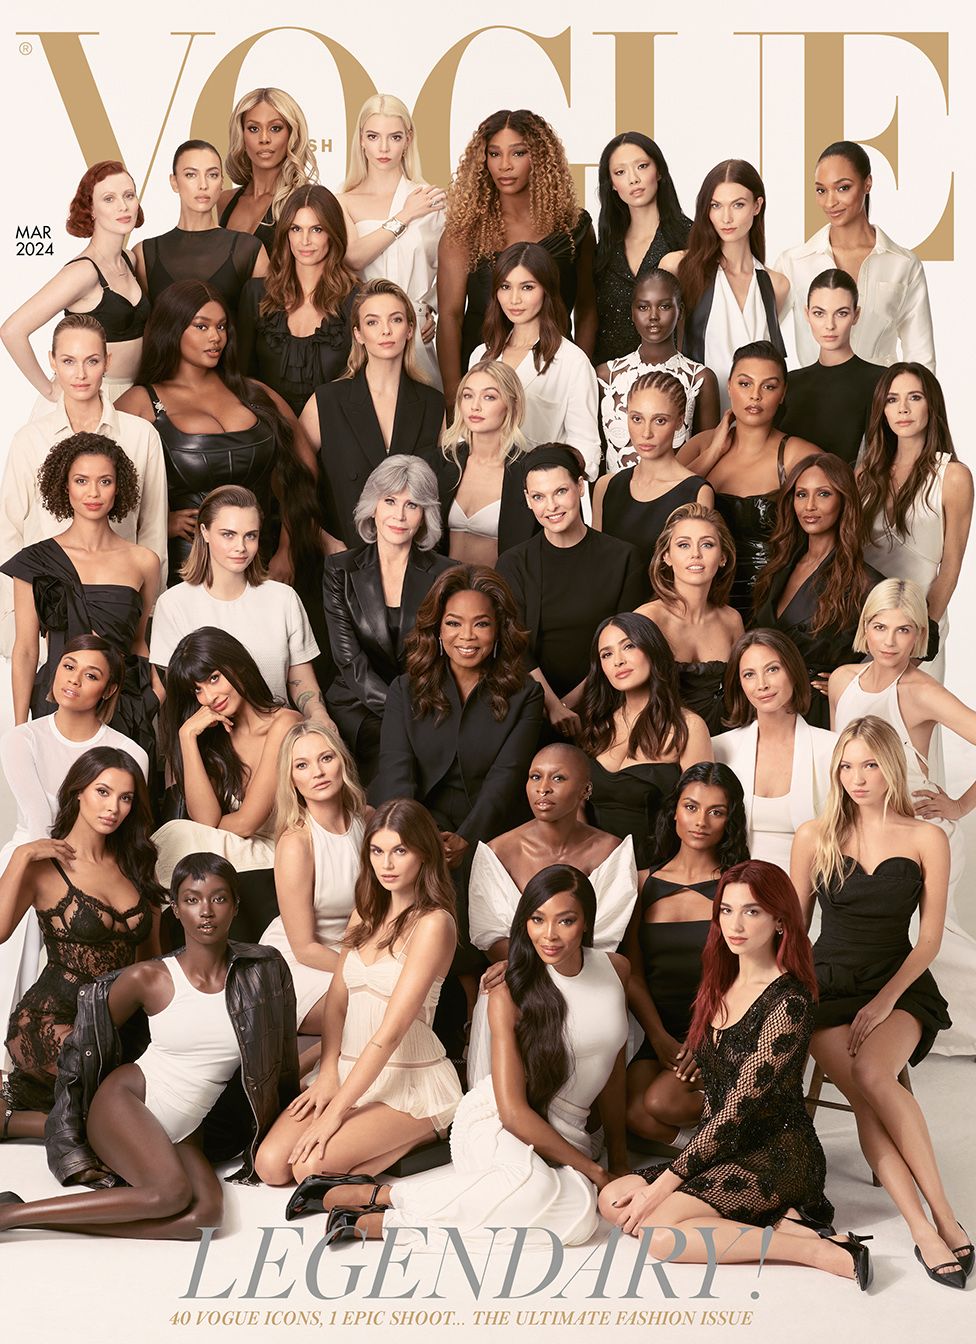 Forty women of varying ages and ethnicities gathered before a white studio backdrop. All are dressed in black, white or a combination of the two, and are looking into the camera. The four women at the front are sitting on the floor, and the rest are behind, arranged in rows that increase in height, so that all 40 are visible. Above their heads, the Vogue logo in gold letters. The cover line reads: "Legendary! 40 Vogue icons, one epic shoot... the ultimate fashion issue."